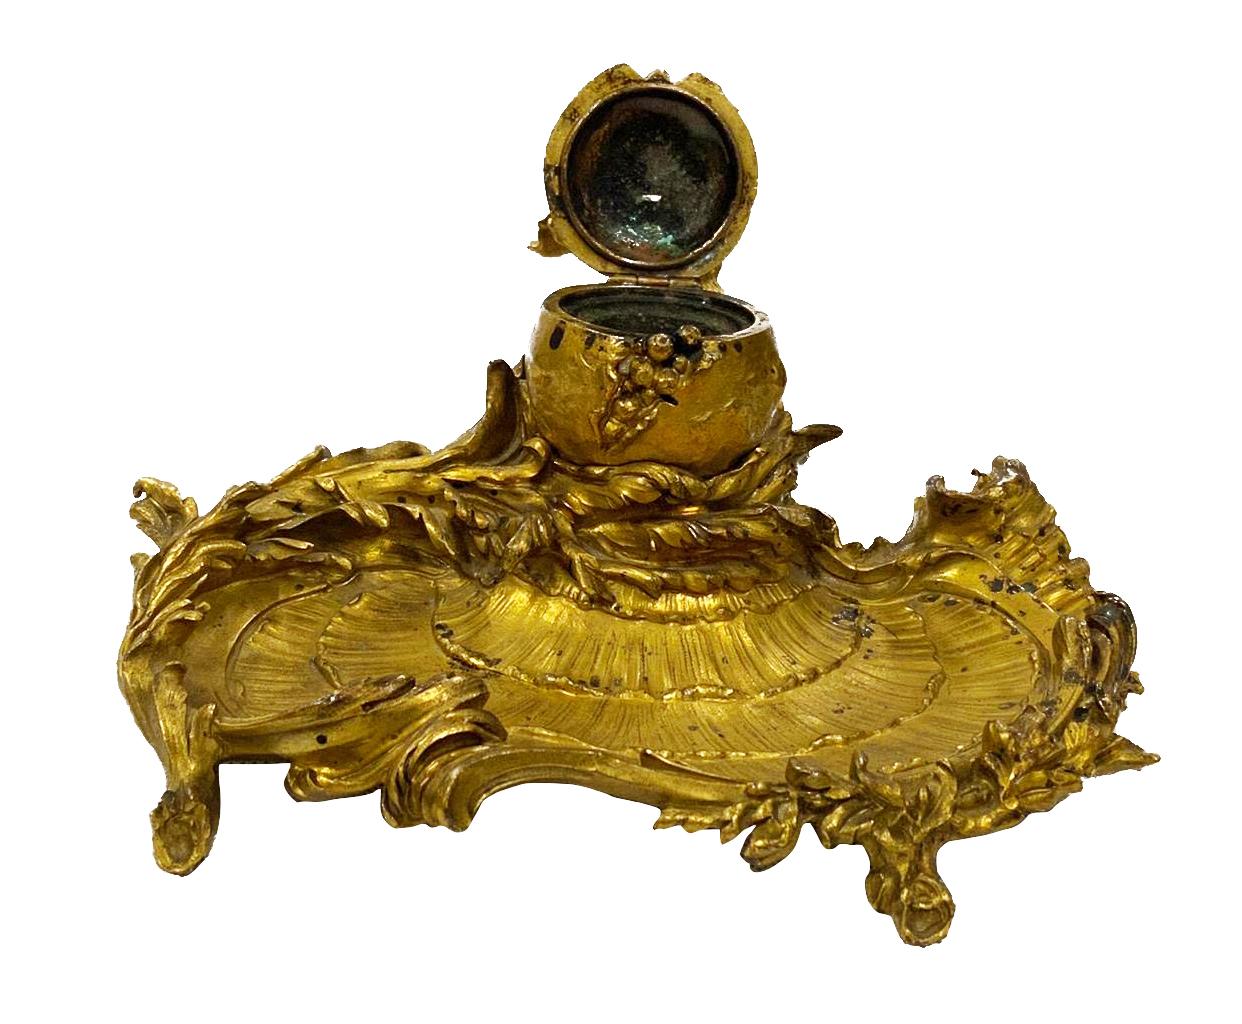 A fine quality late 19th century gilded ormolu desk inkwell, stamped; Sormani, Paris. Having wonderful stylized scrolling foliate and shell like decoration, with a hinged central lid. Measures: 22cm (8.5